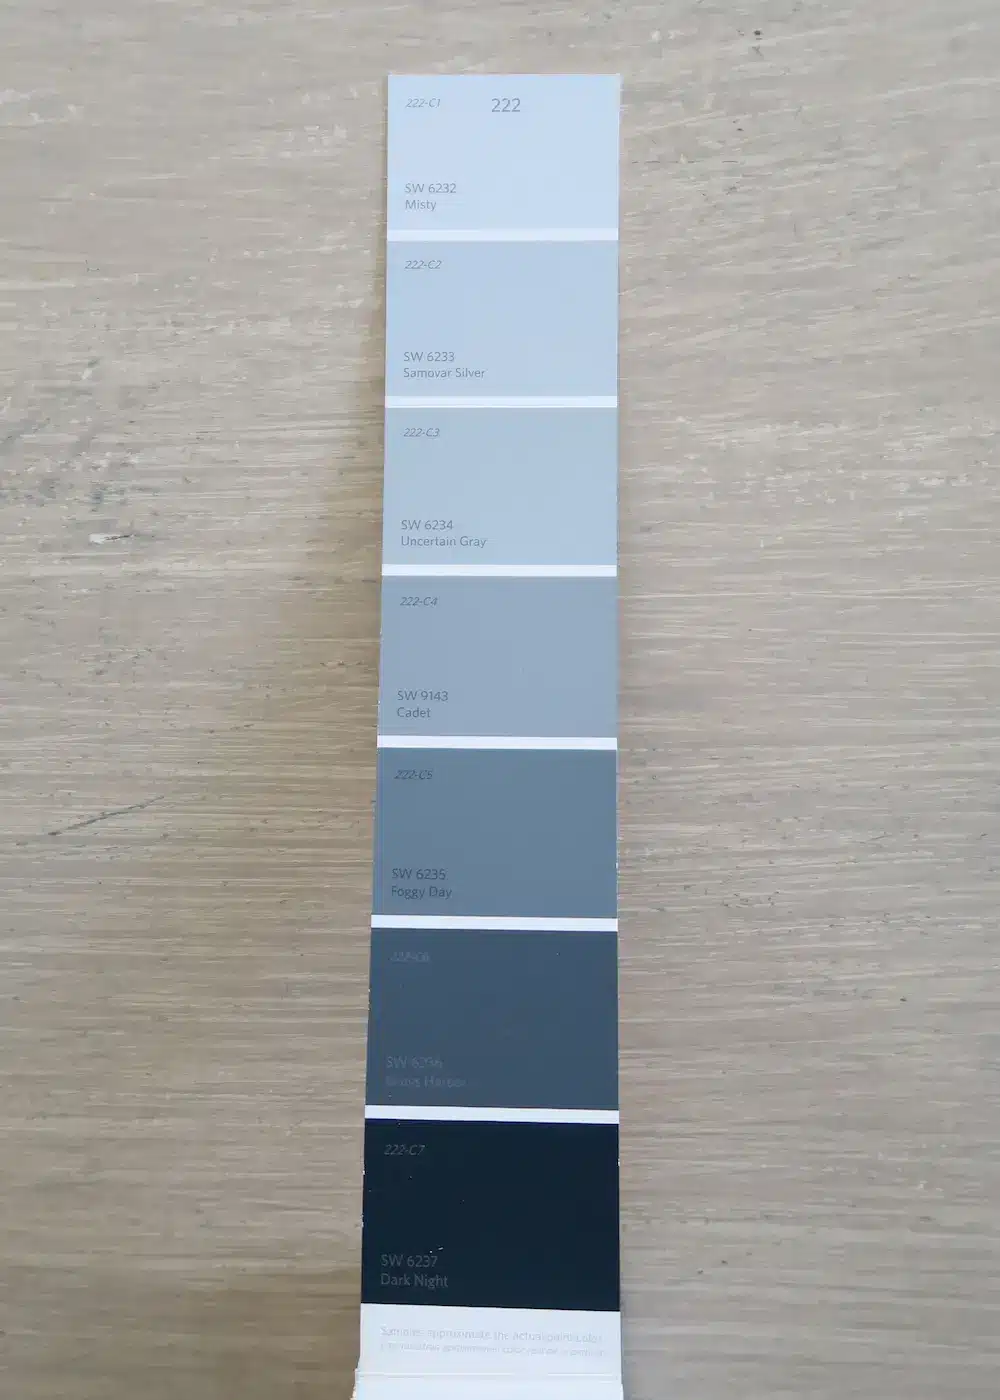 sherwin-williams-misty-paint-color-strip